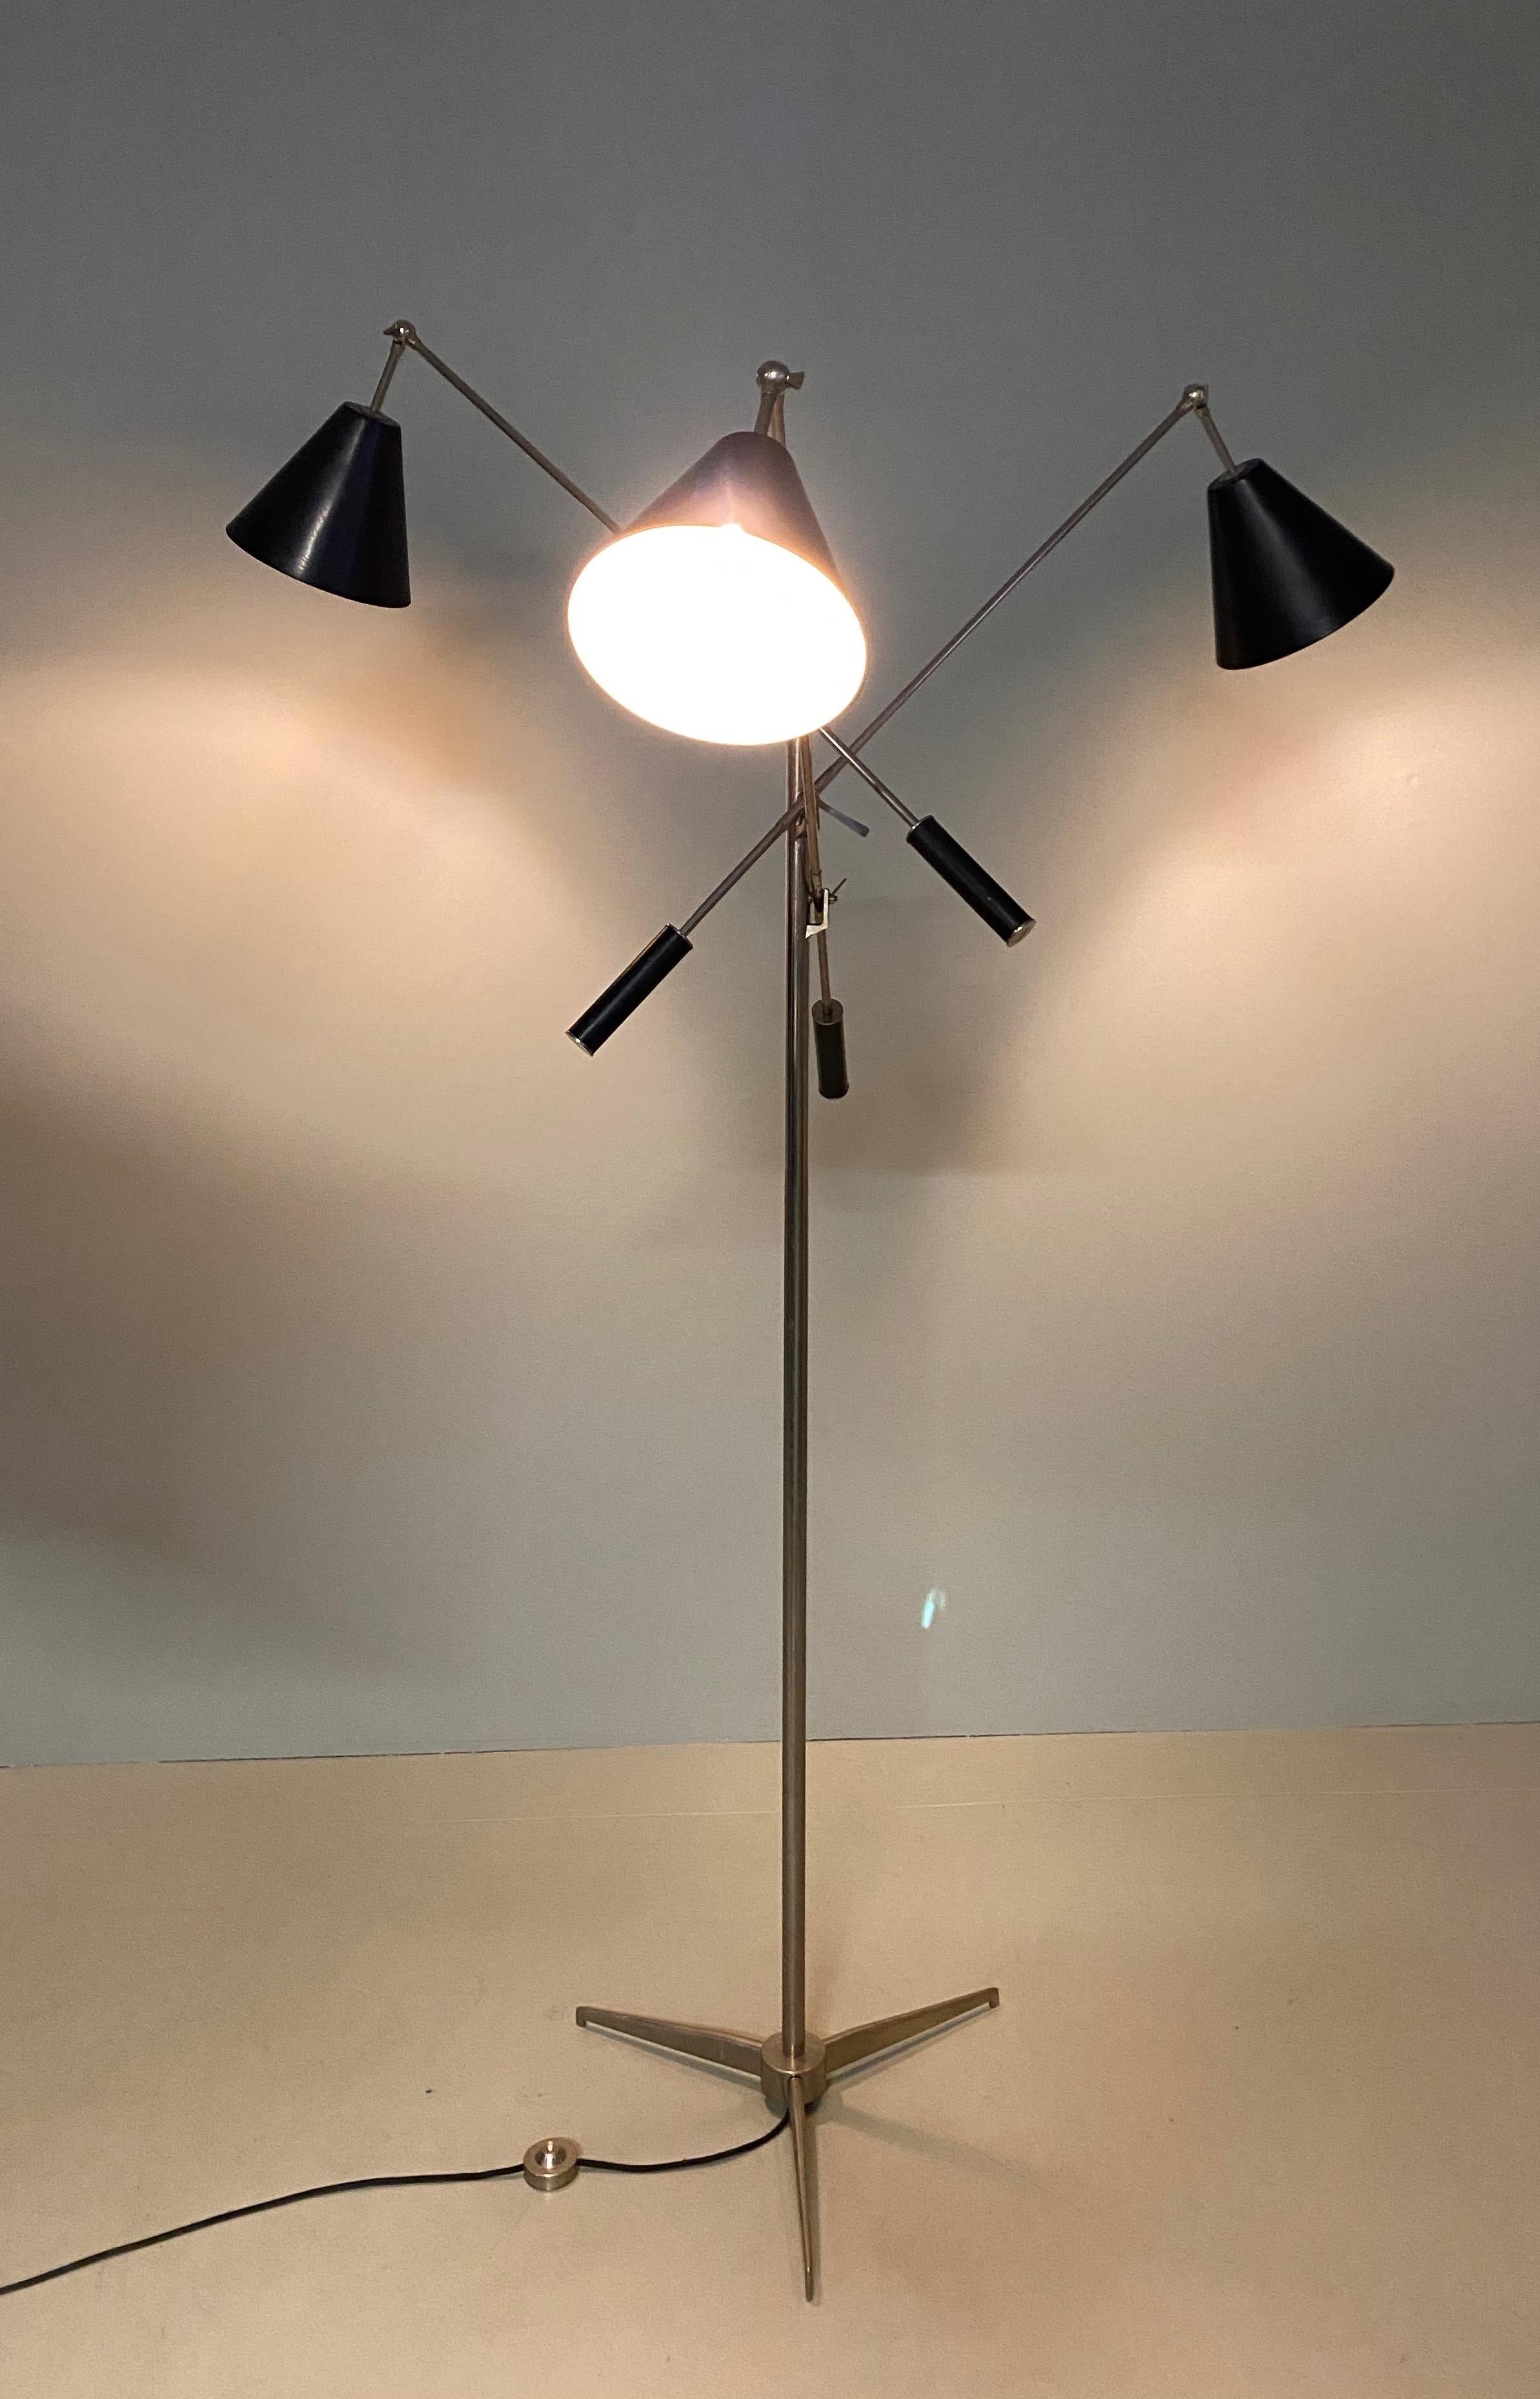 Angelo Lelli for Arredoluce, Triennale floor lamp, brass nickeled. l, Italy, circa 1953. This iconic lamp was designed by Angello Lelii for Arredoluce in Italy in 1953. It has three shades, black, each mounted on a long rod and clustered on a metal